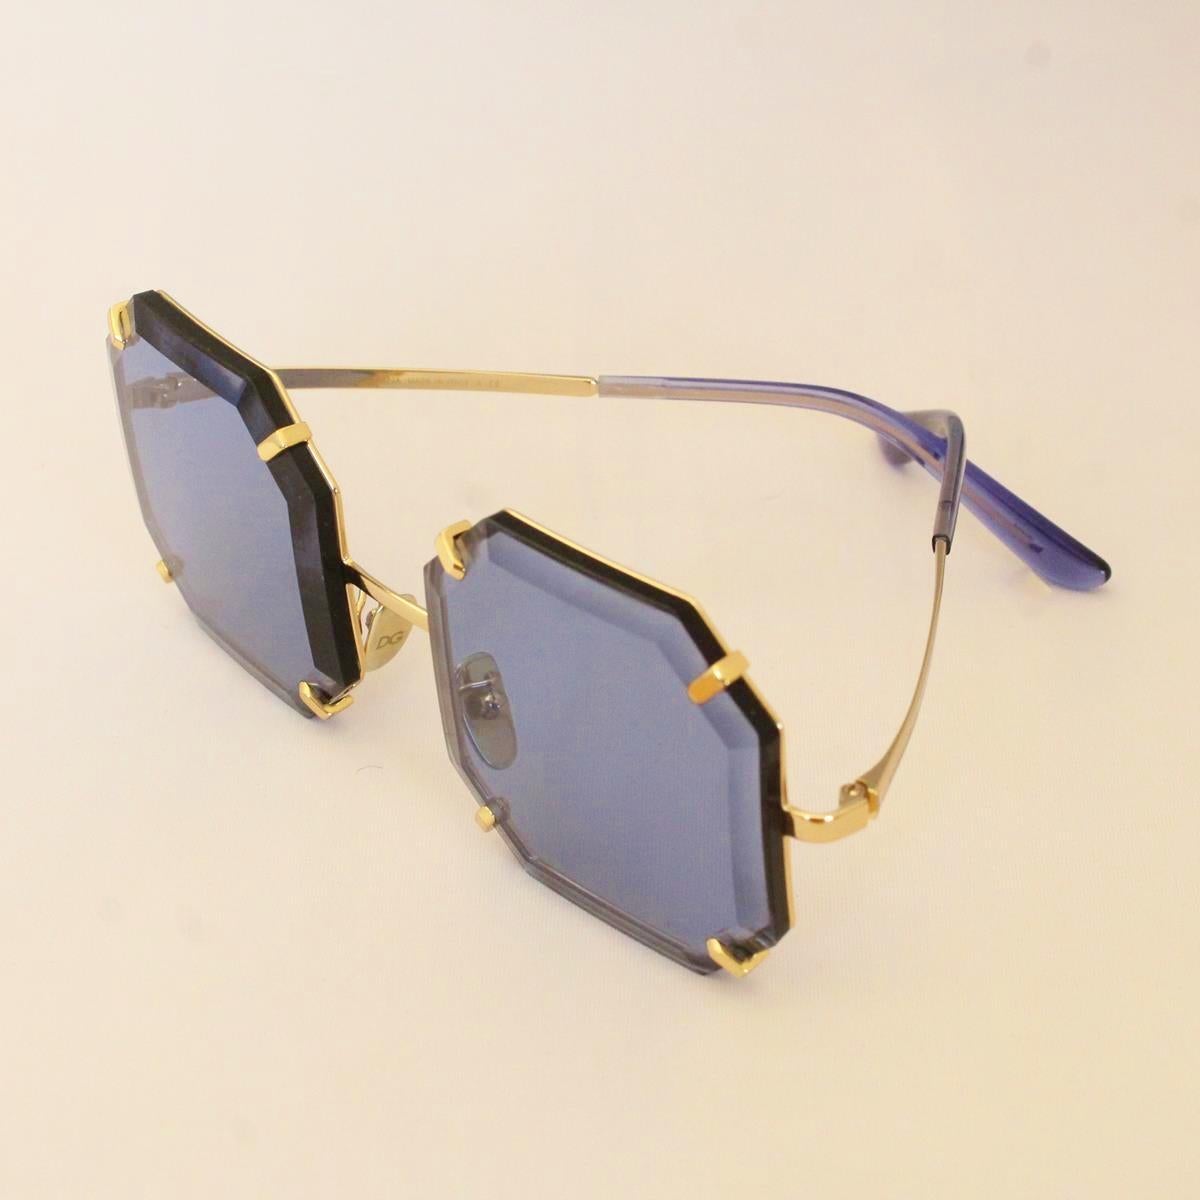 New Summer 2019 Collection
Brand new from boutique, with case
Sunglasses
Blue lenses
Octagonal frames
Length cm 14 (5.5 inches)
Made in Italy
Worldwide express shipping included in the price !